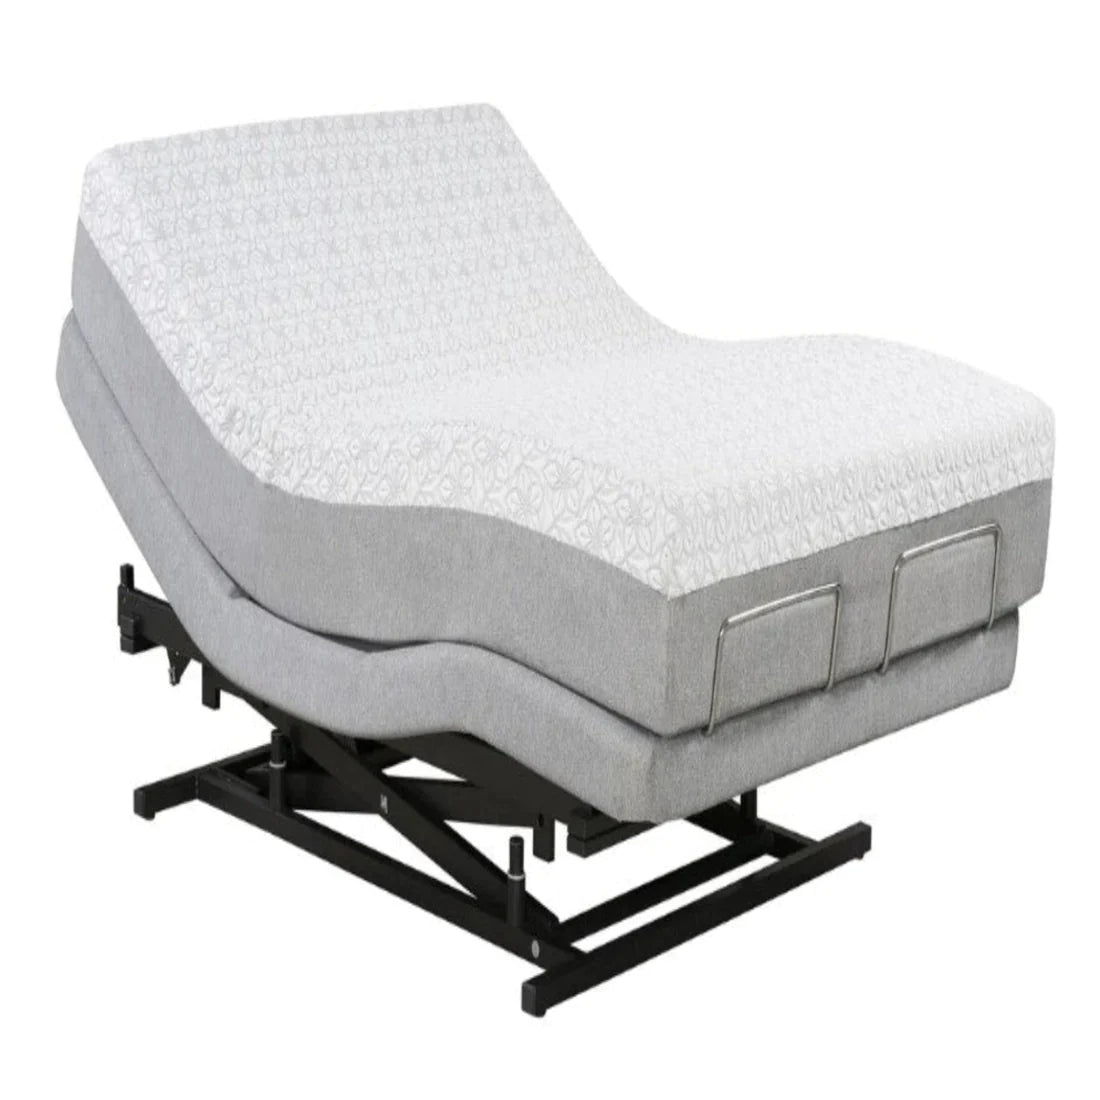 Parks Health KALMIA Perfect-Height Hi-low Adjustable Bed